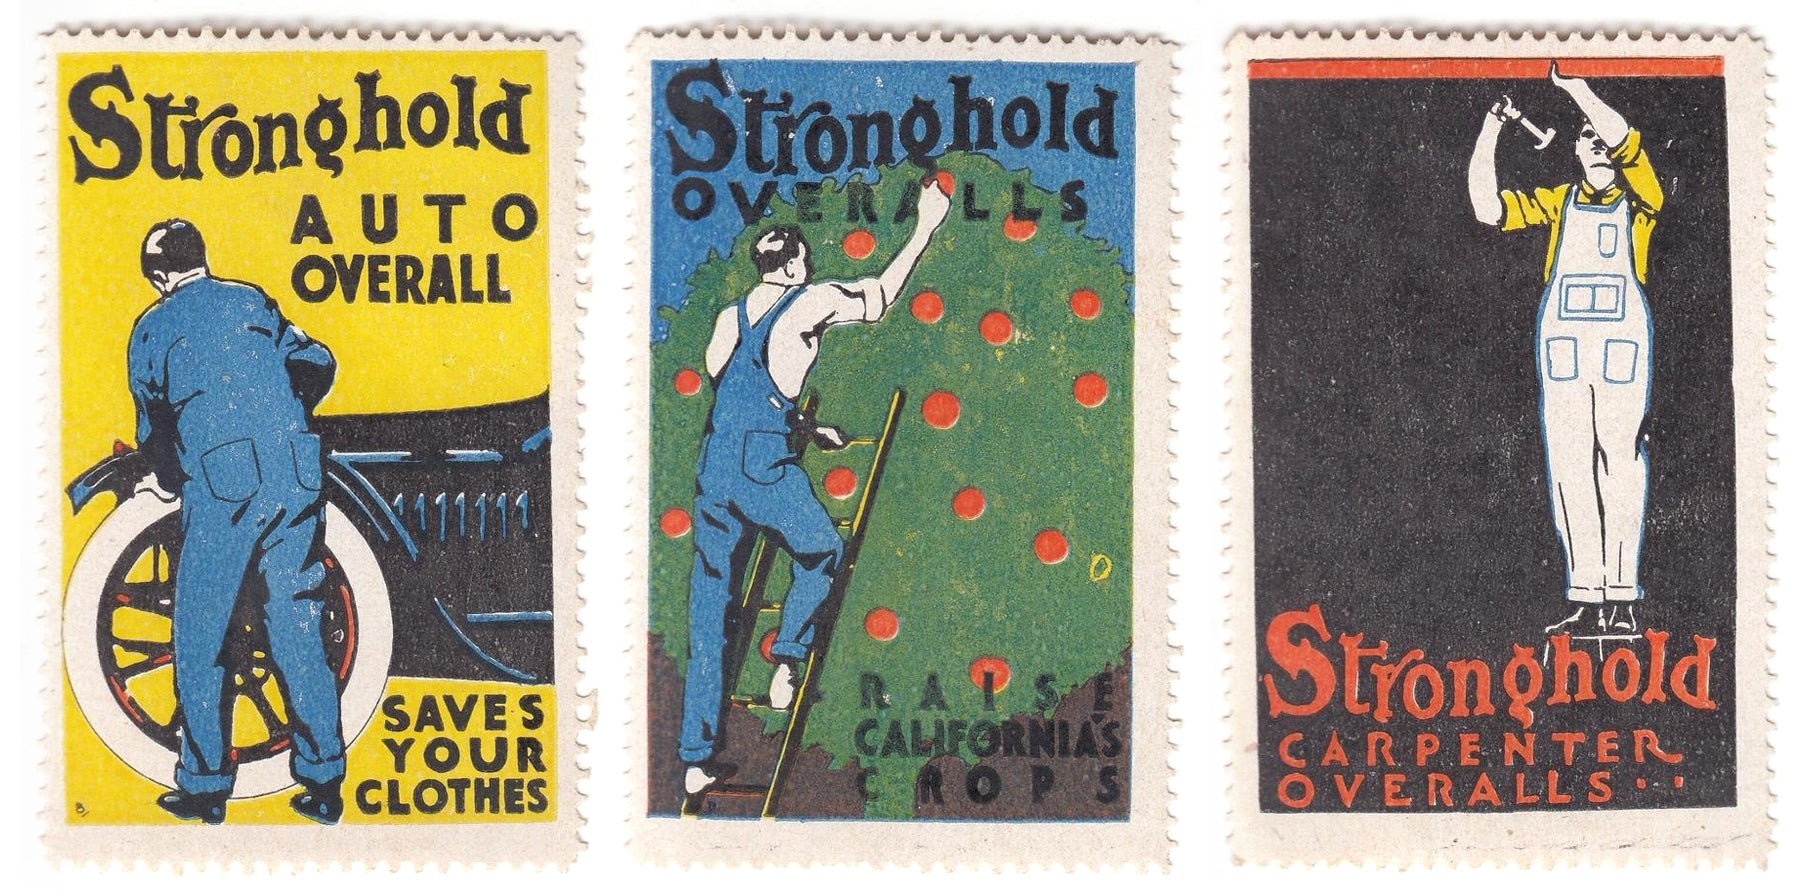 The Stronghold Advertising Stamps